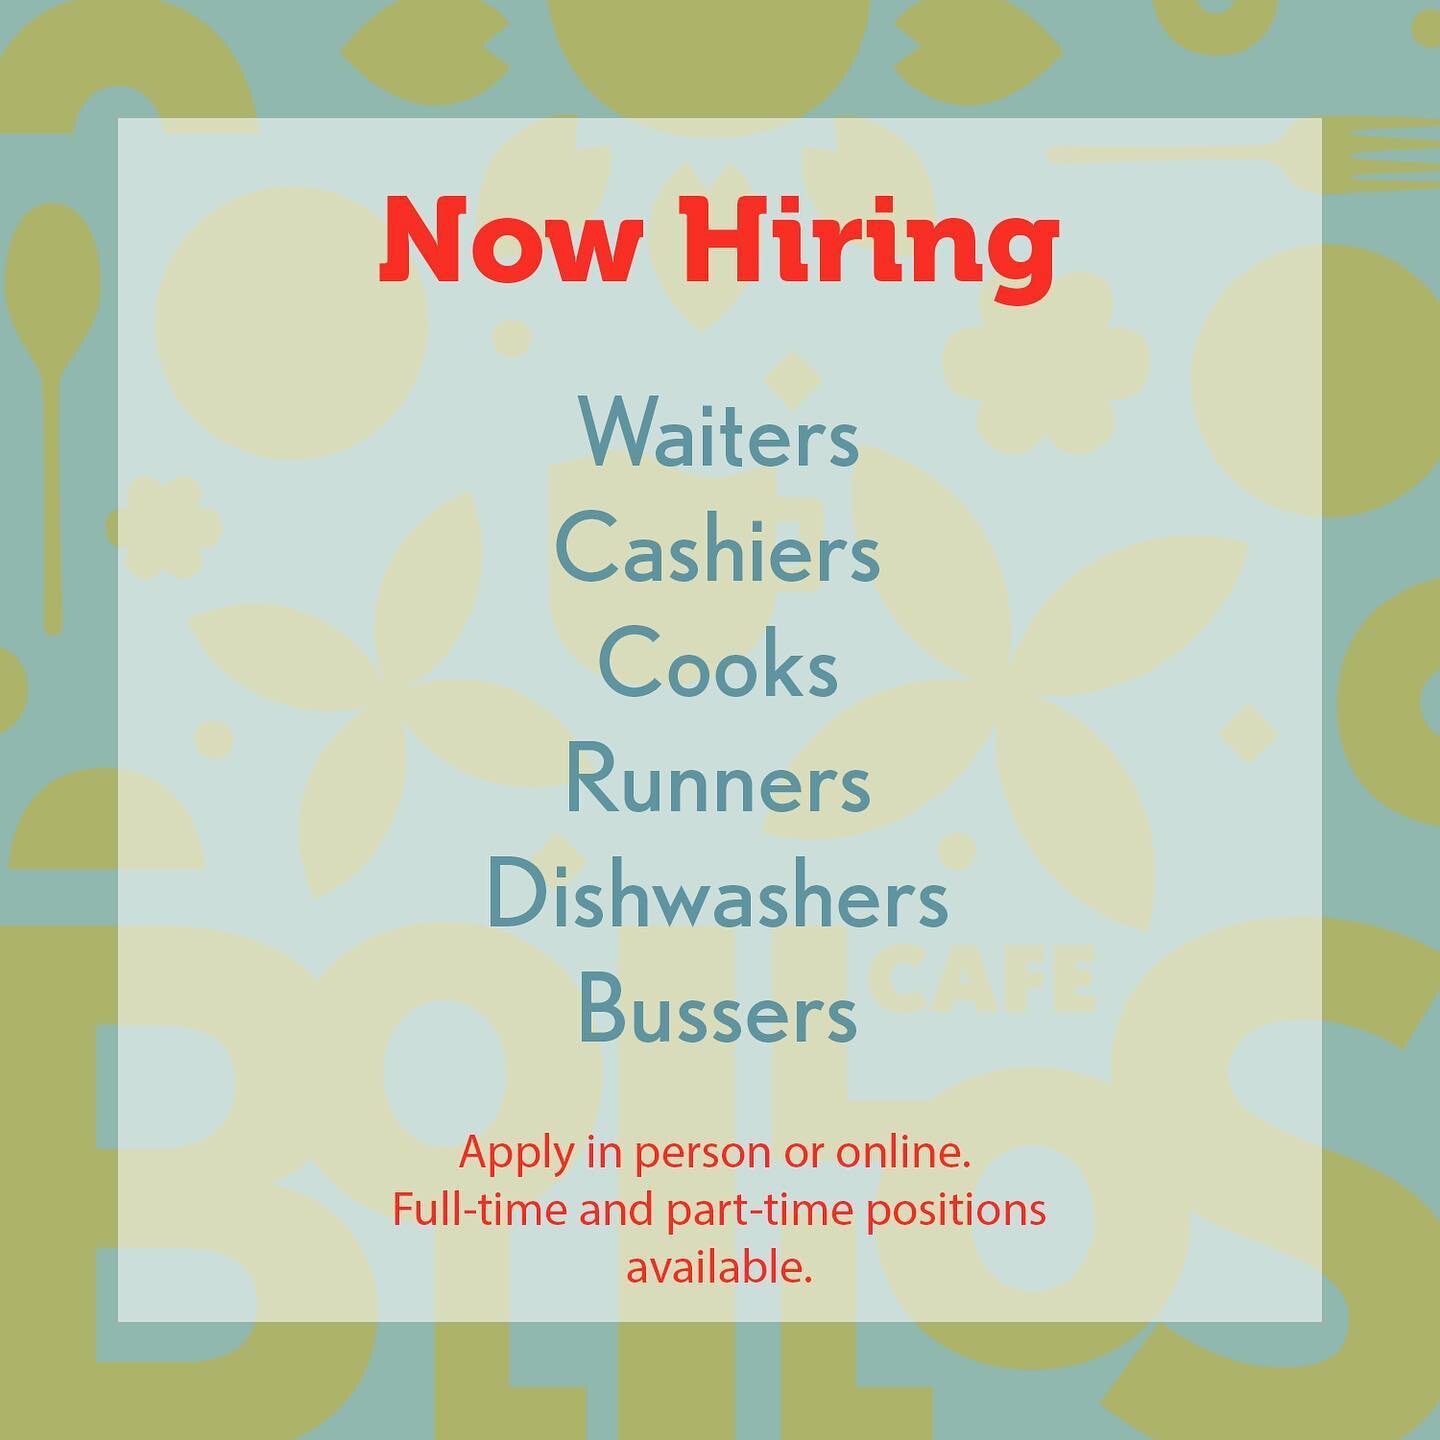 Visit one of our two locations to apply or apply online https://www.bolilloscafe.com/careers